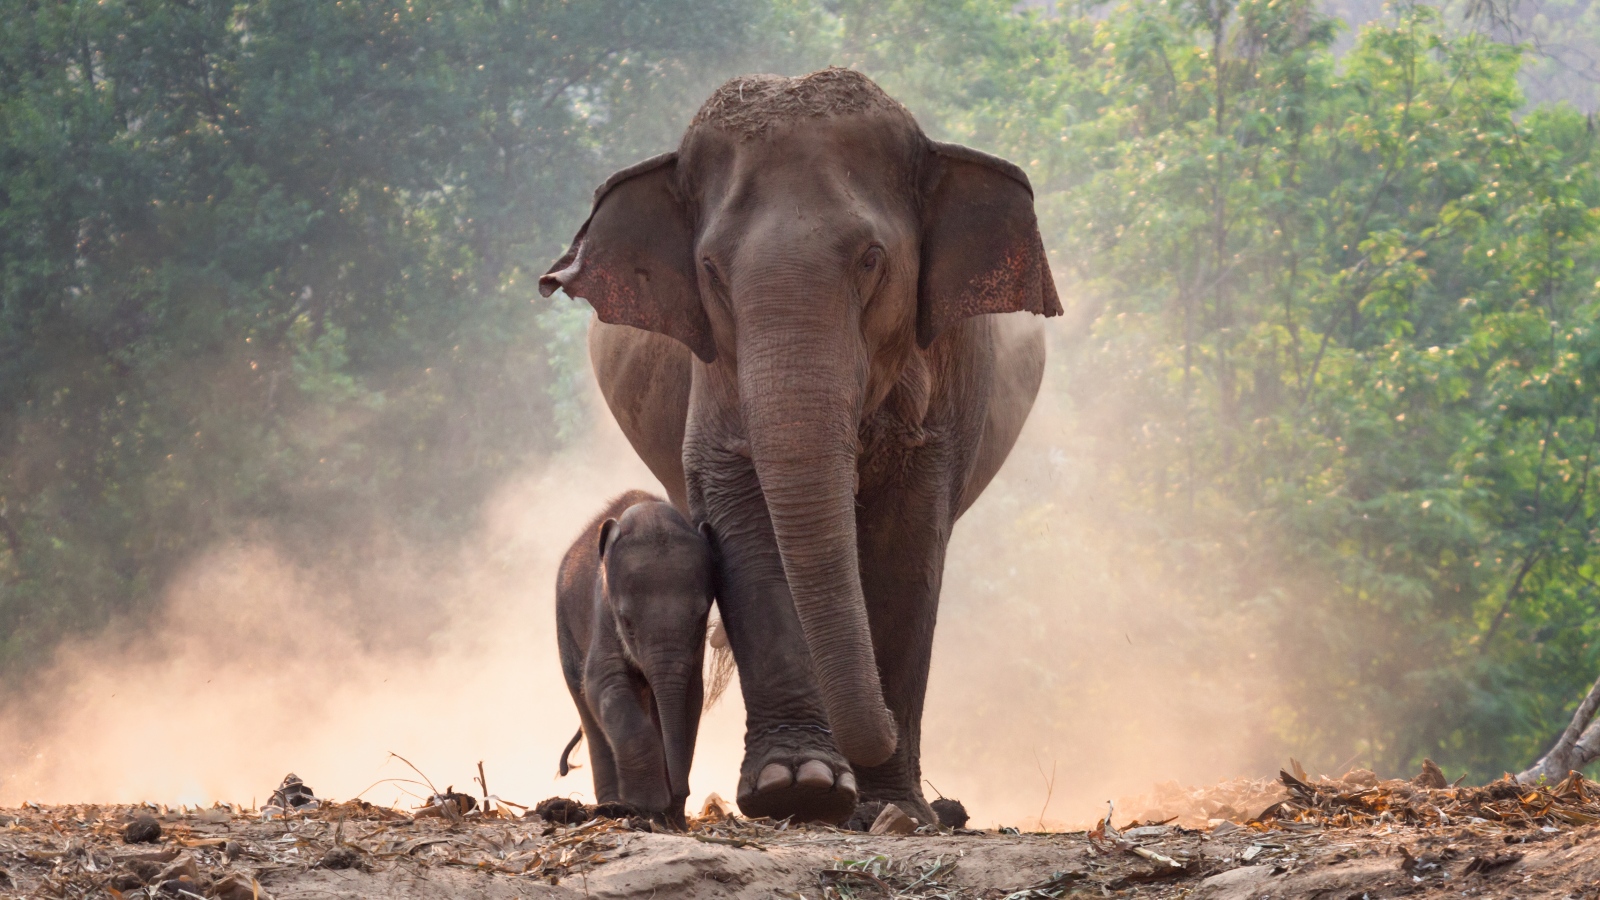 an elephant and their child.